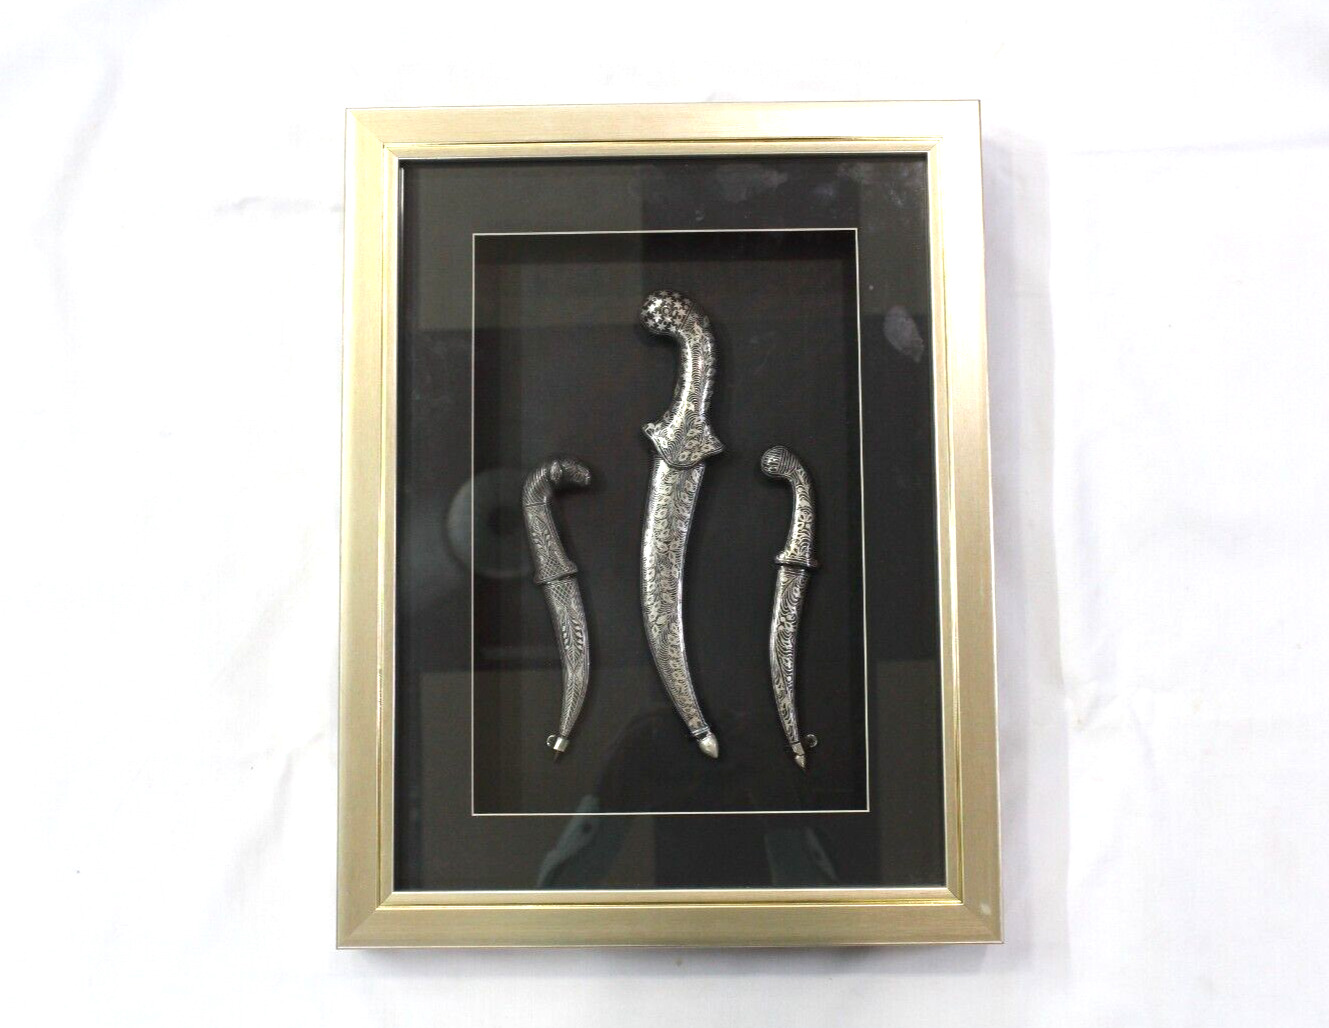 Home decorative wall hanging framed silver work dagger gift 17 x 13 inches W 185